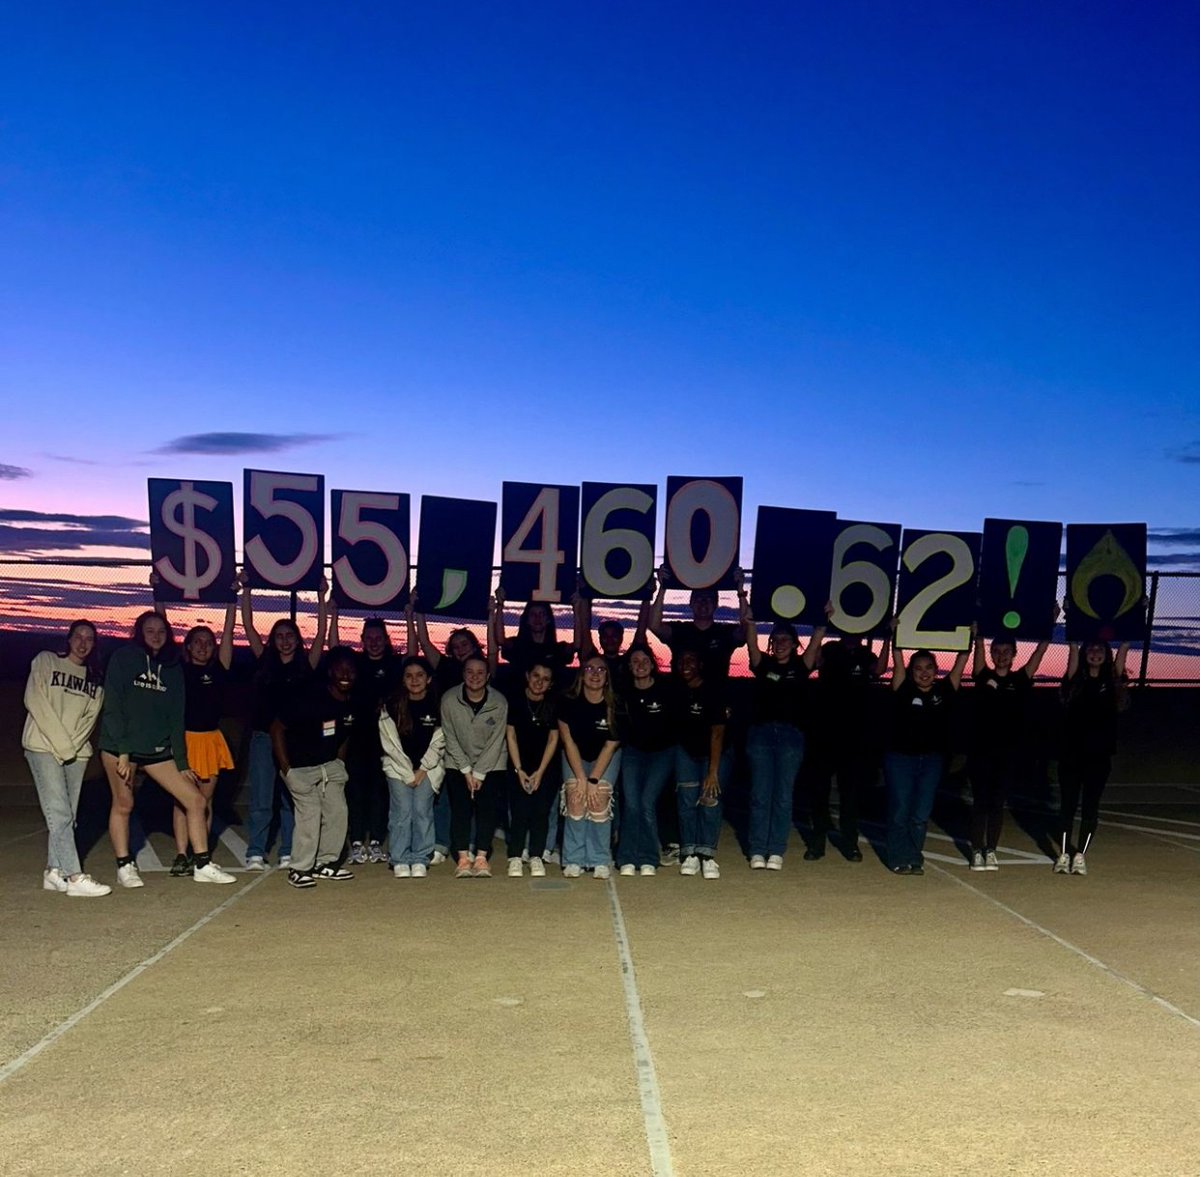 EagleTHON, an eight-hour dance marathon for students, raised more than $55,000 for Children’s National Hospital! Great job! Photo: aueaglethon on Instagram